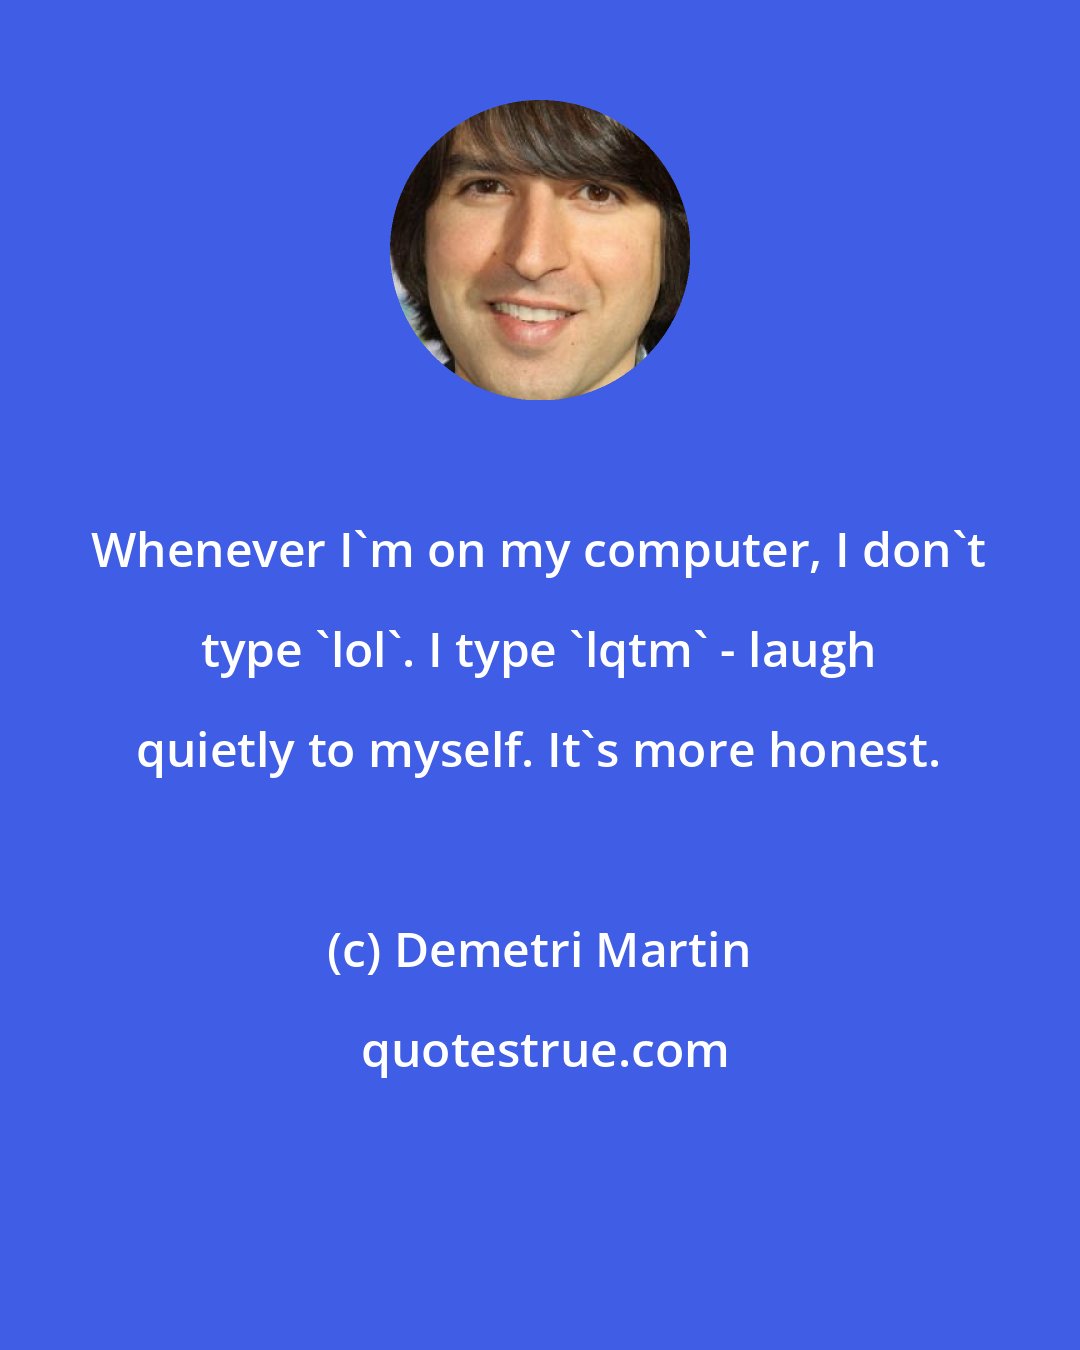 Demetri Martin: Whenever I'm on my computer, I don't type 'lol'. I type 'lqtm' - laugh quietly to myself. It's more honest.